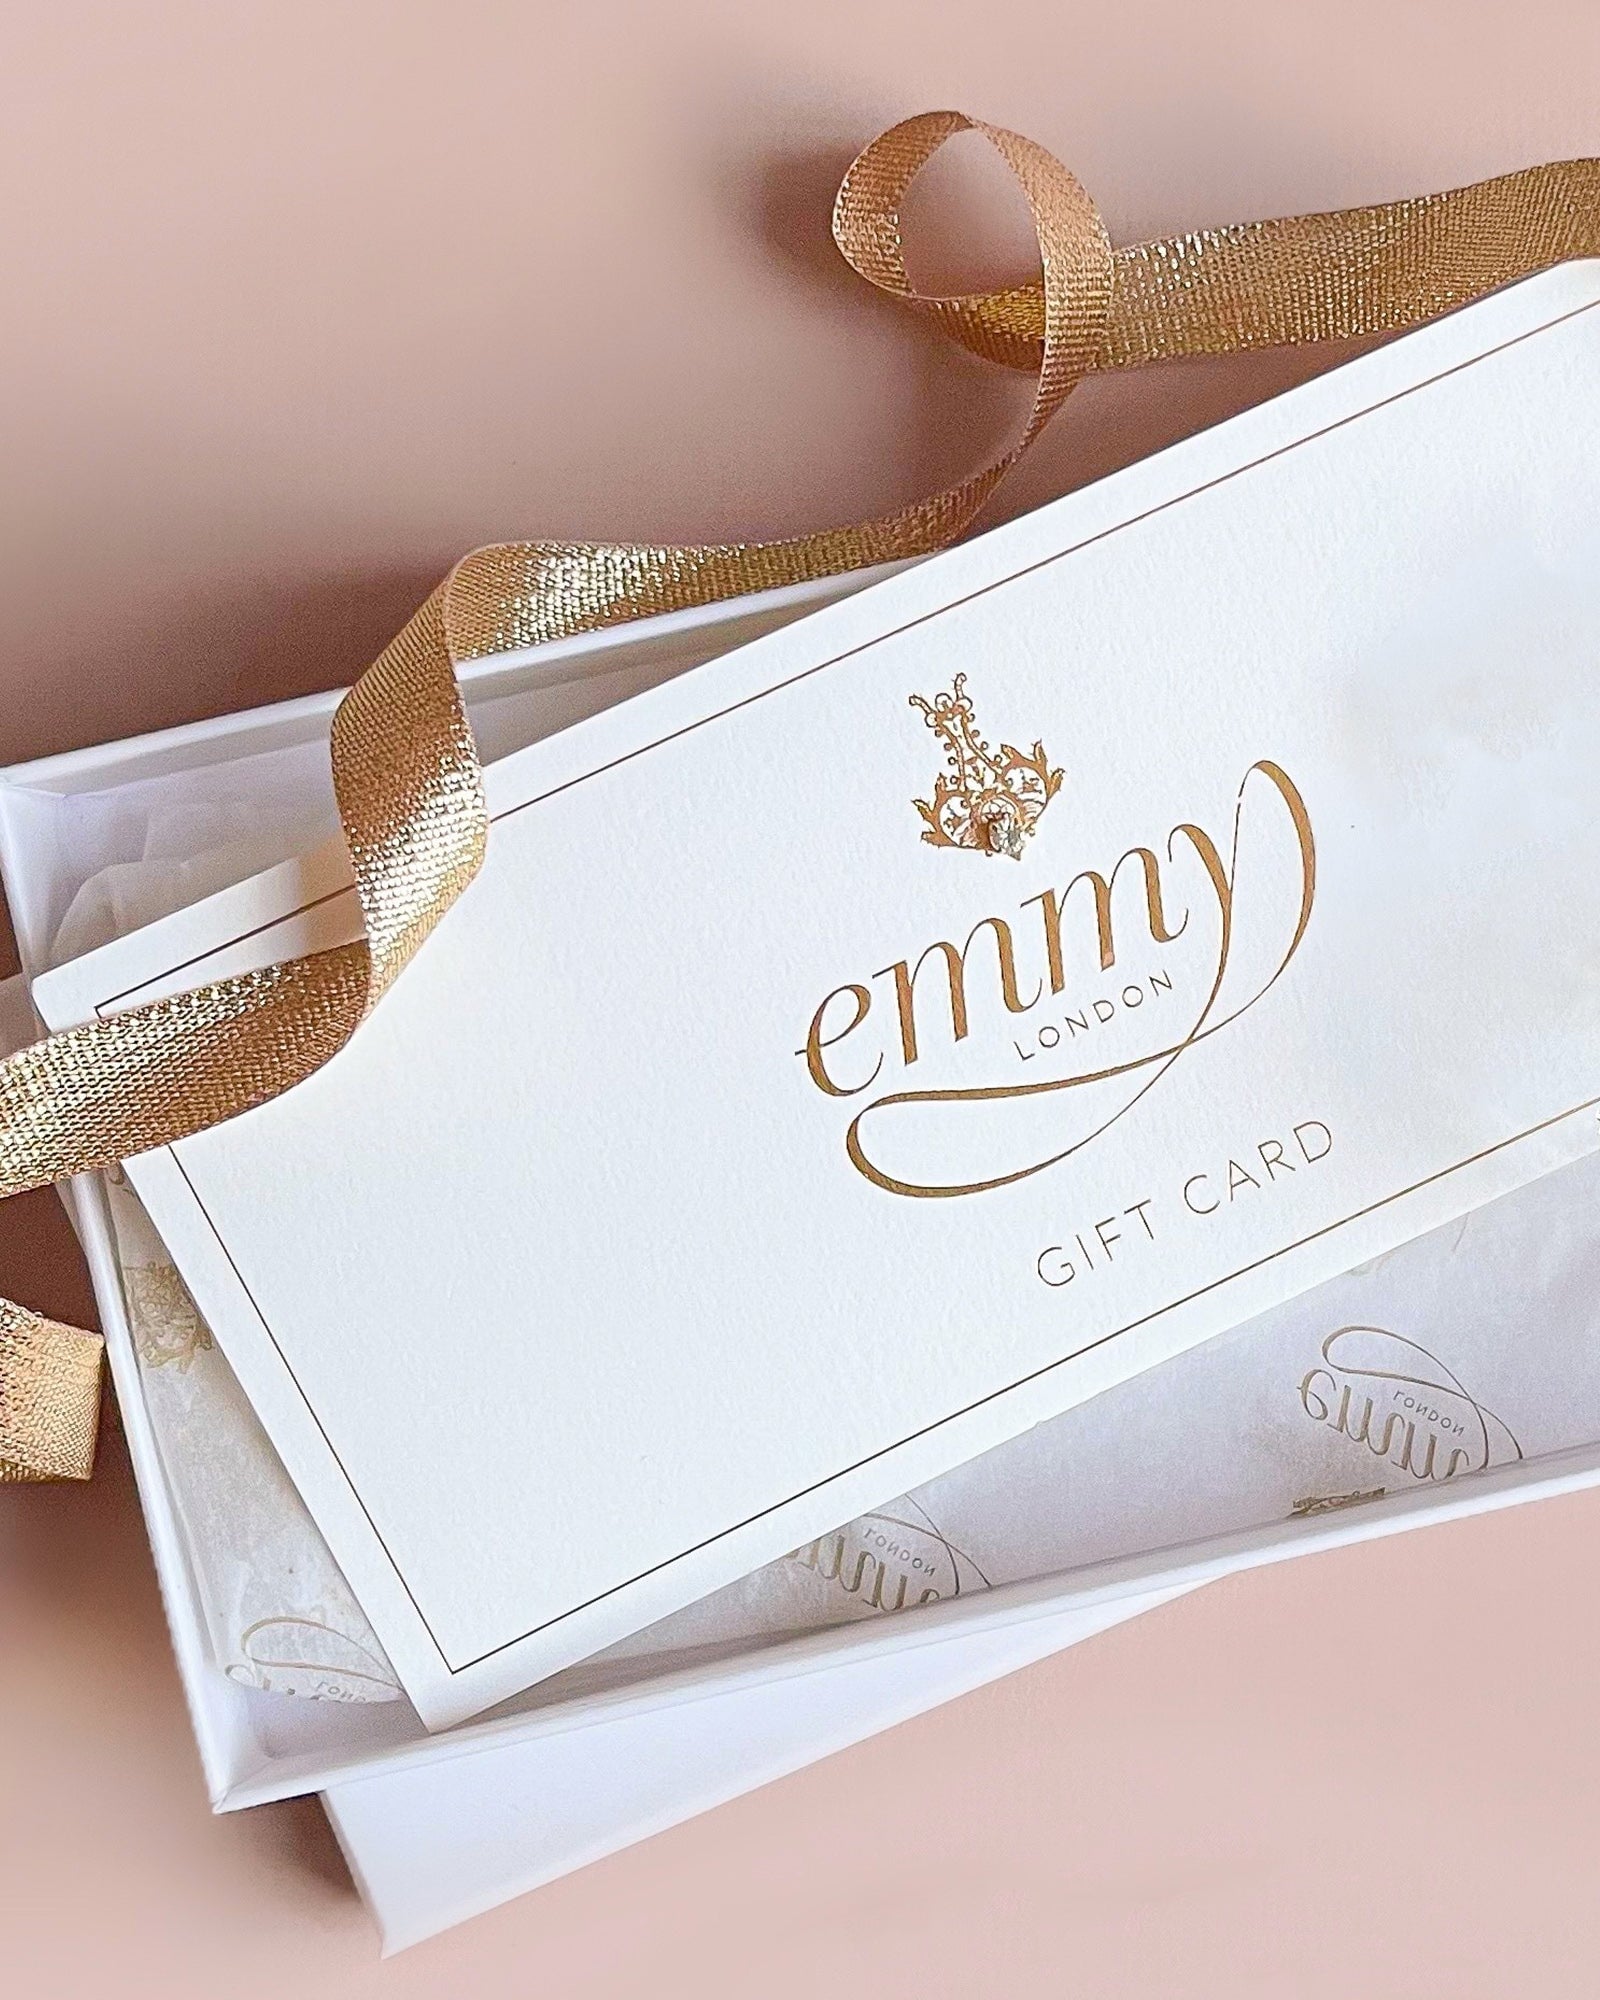 Emmy London Digital Gift Card Gift Card The Perfect Gift  image